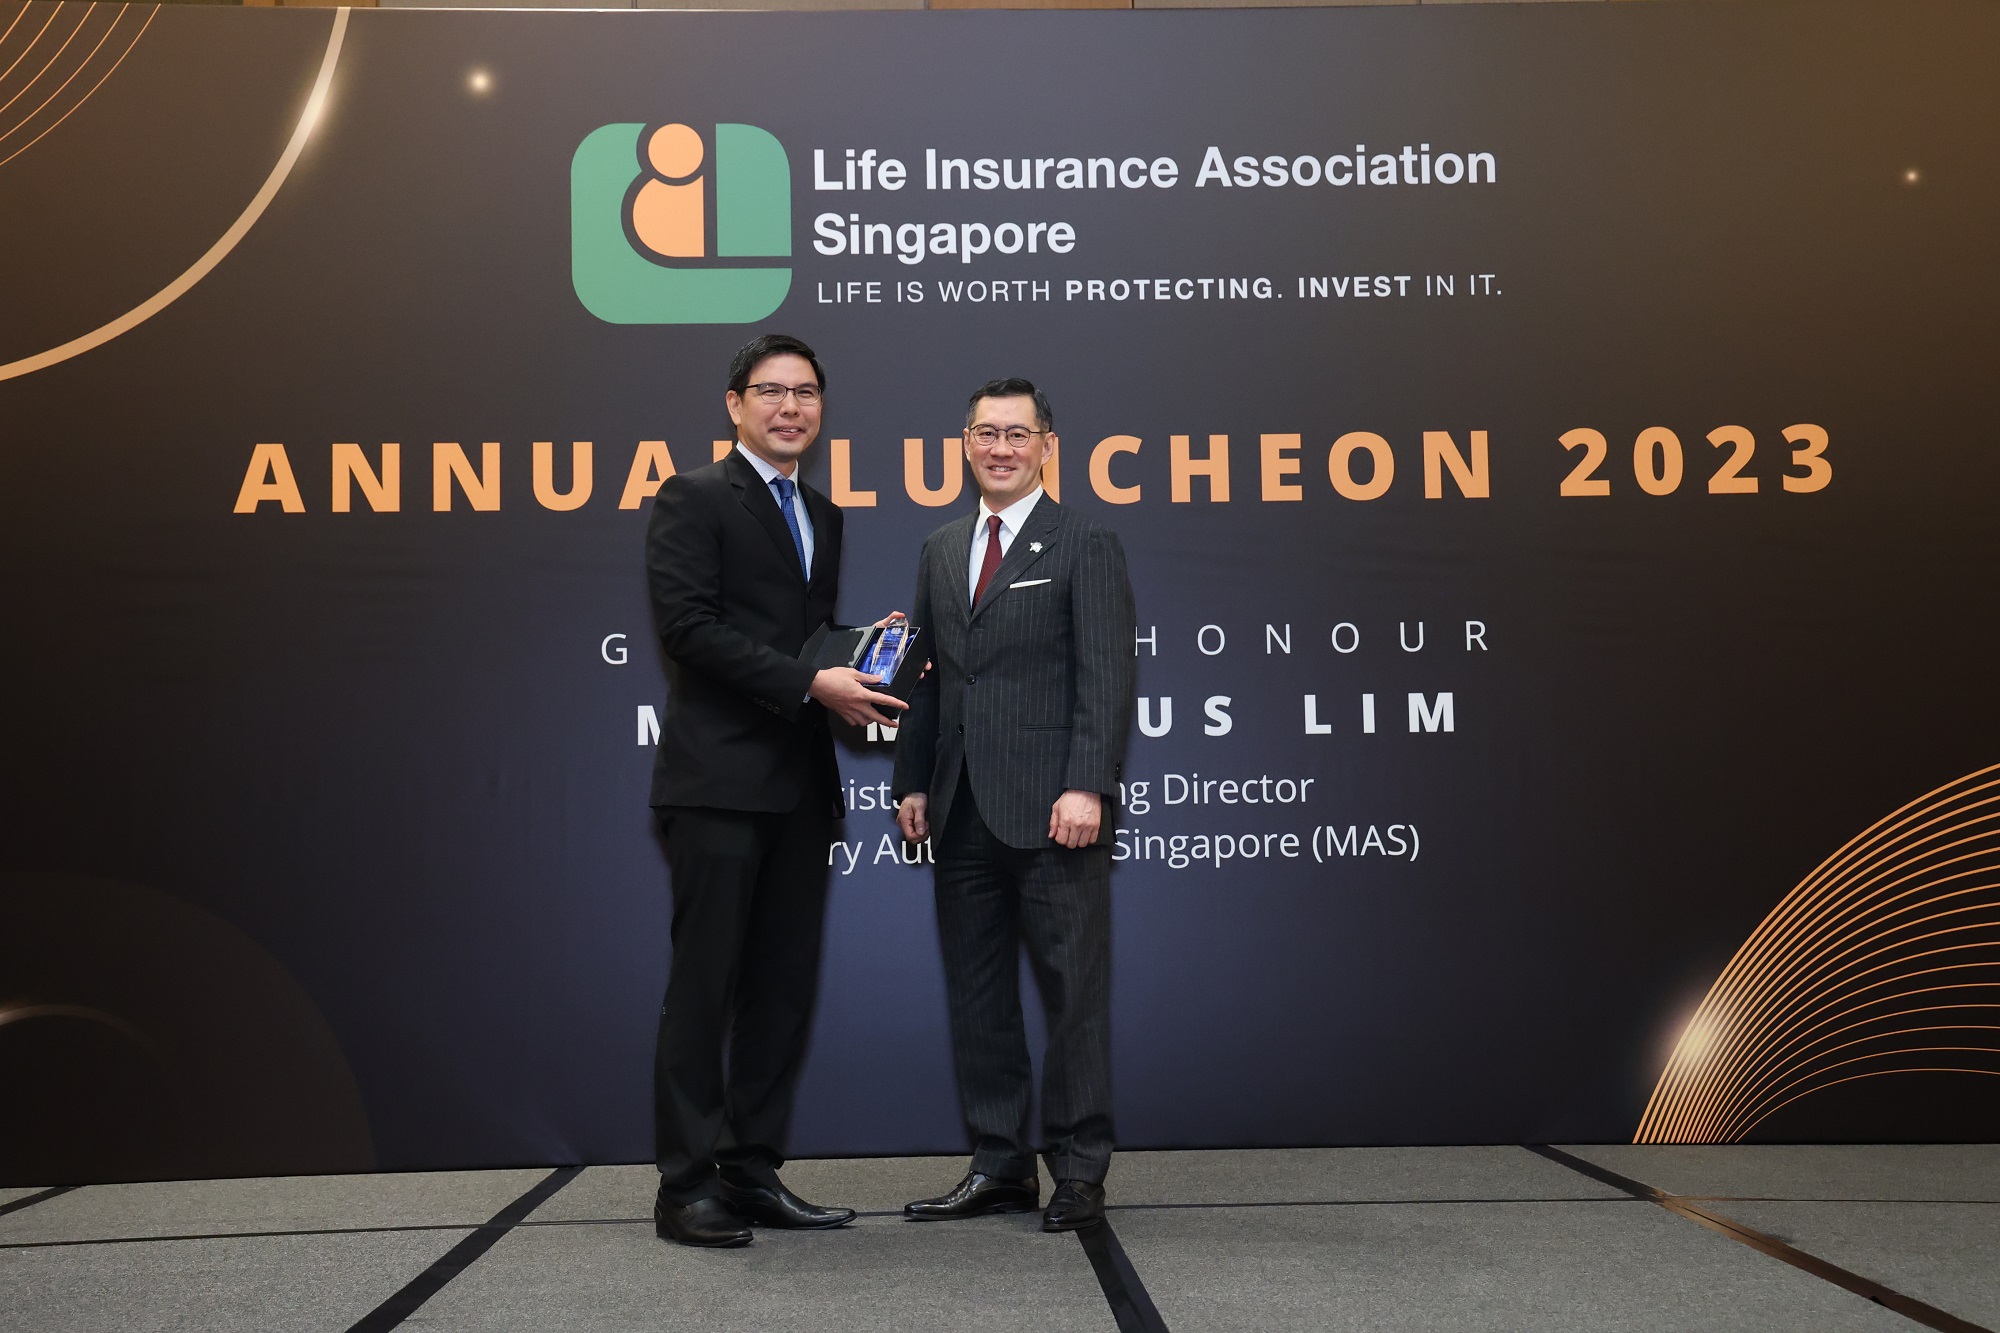 Newly elected President for 2023 – 2024, Mr Dennis Tan (on the right) with Guest-of-Honour, Mr Marcus Lim, Assistant Managing Director of the Banking and Insurance Group, Monetary Authority of Singapore (on the left).